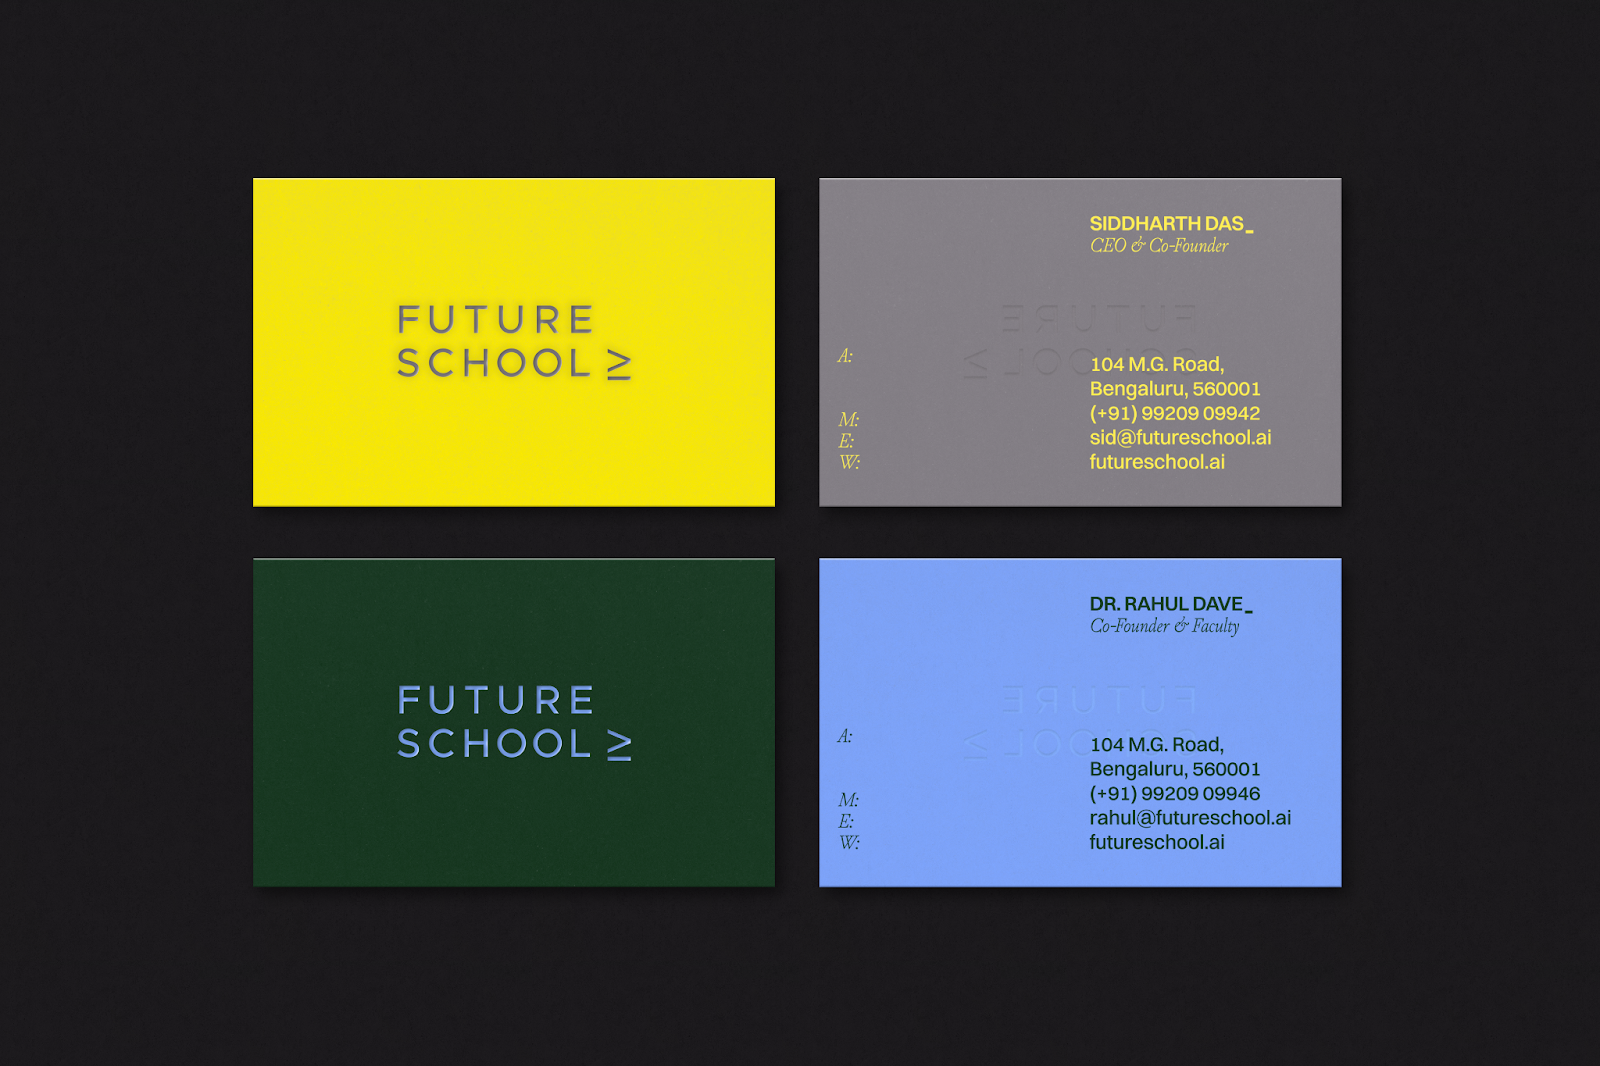 Branding and visual identity artifact from the work created by Alessia Oertel for Future School.AI